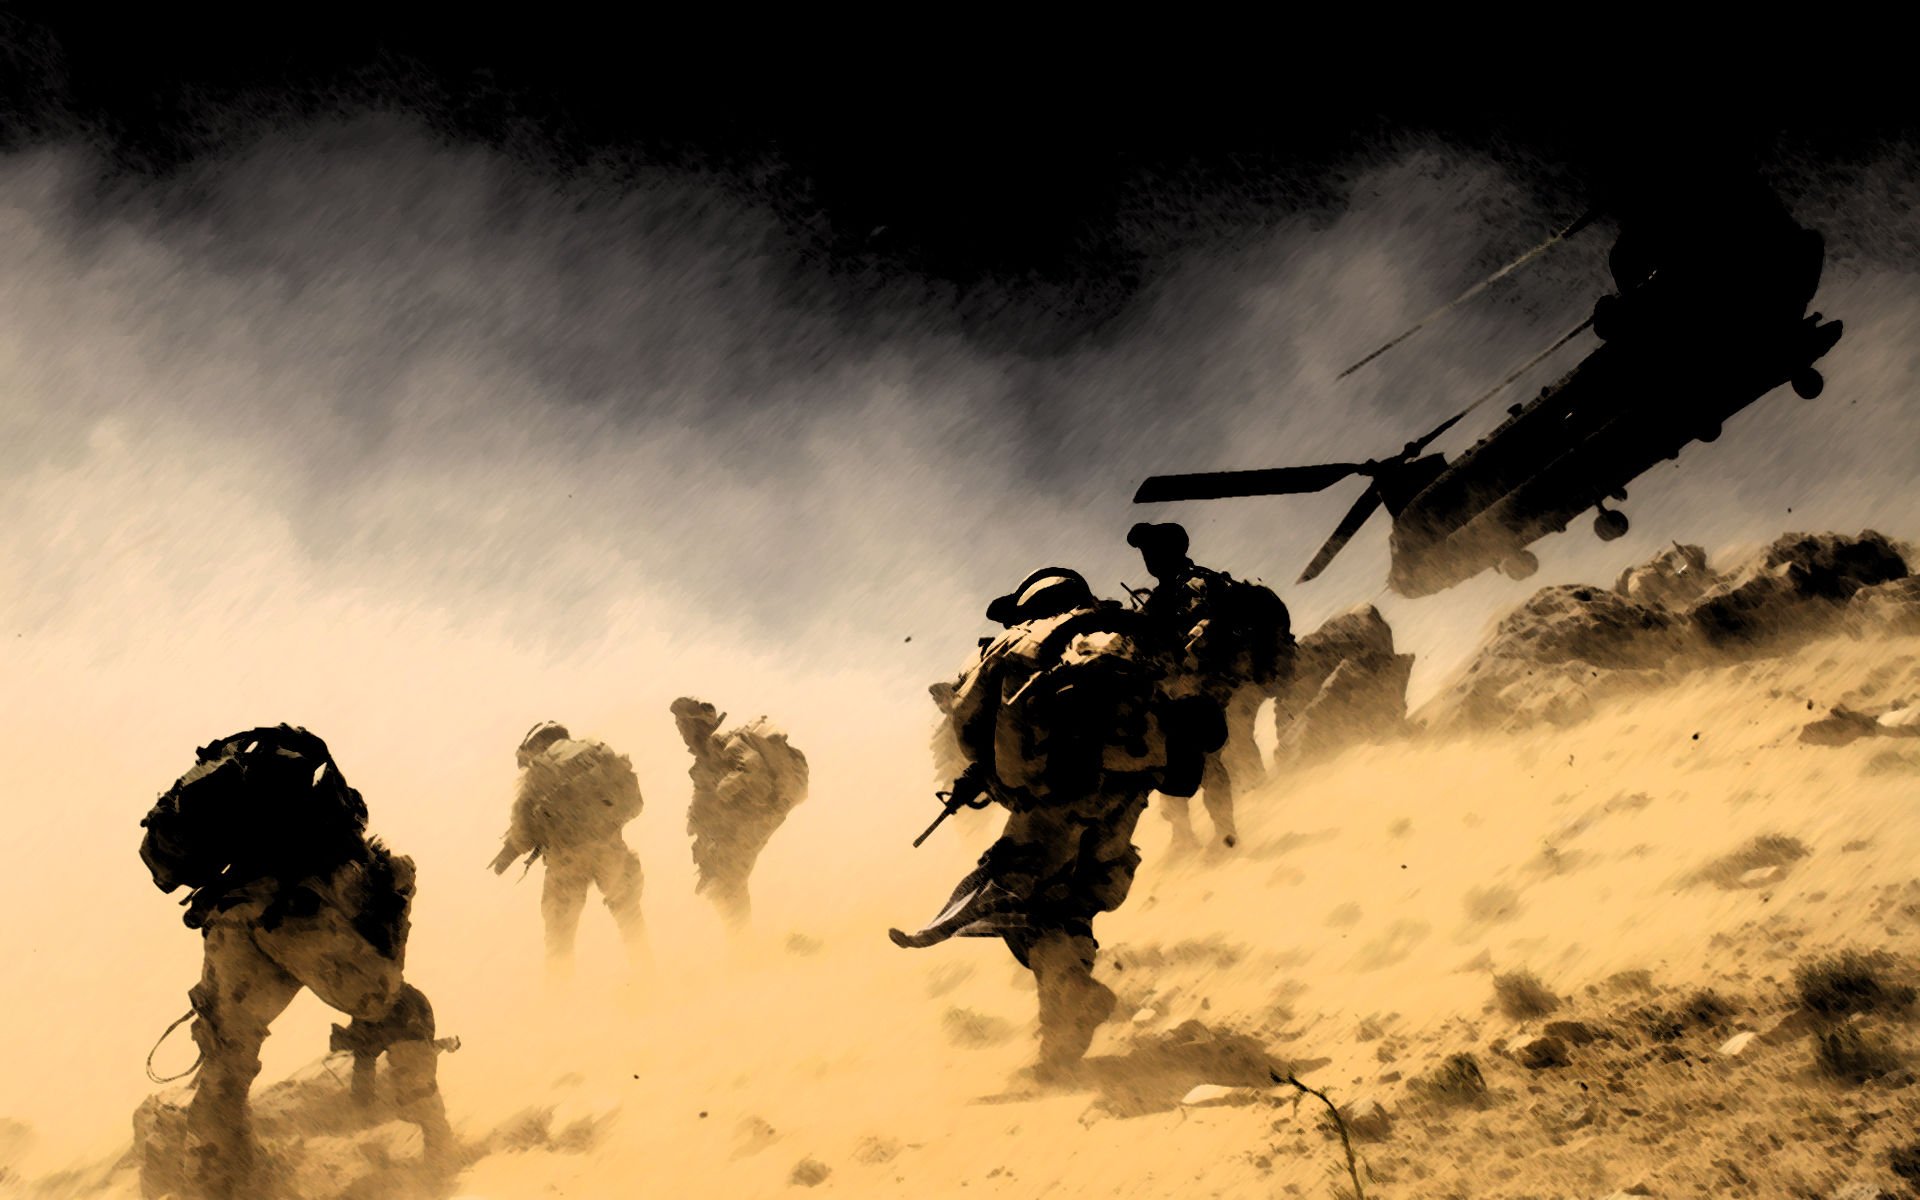 us army widescreen high resolution wallpaper download us army images 1920x1200